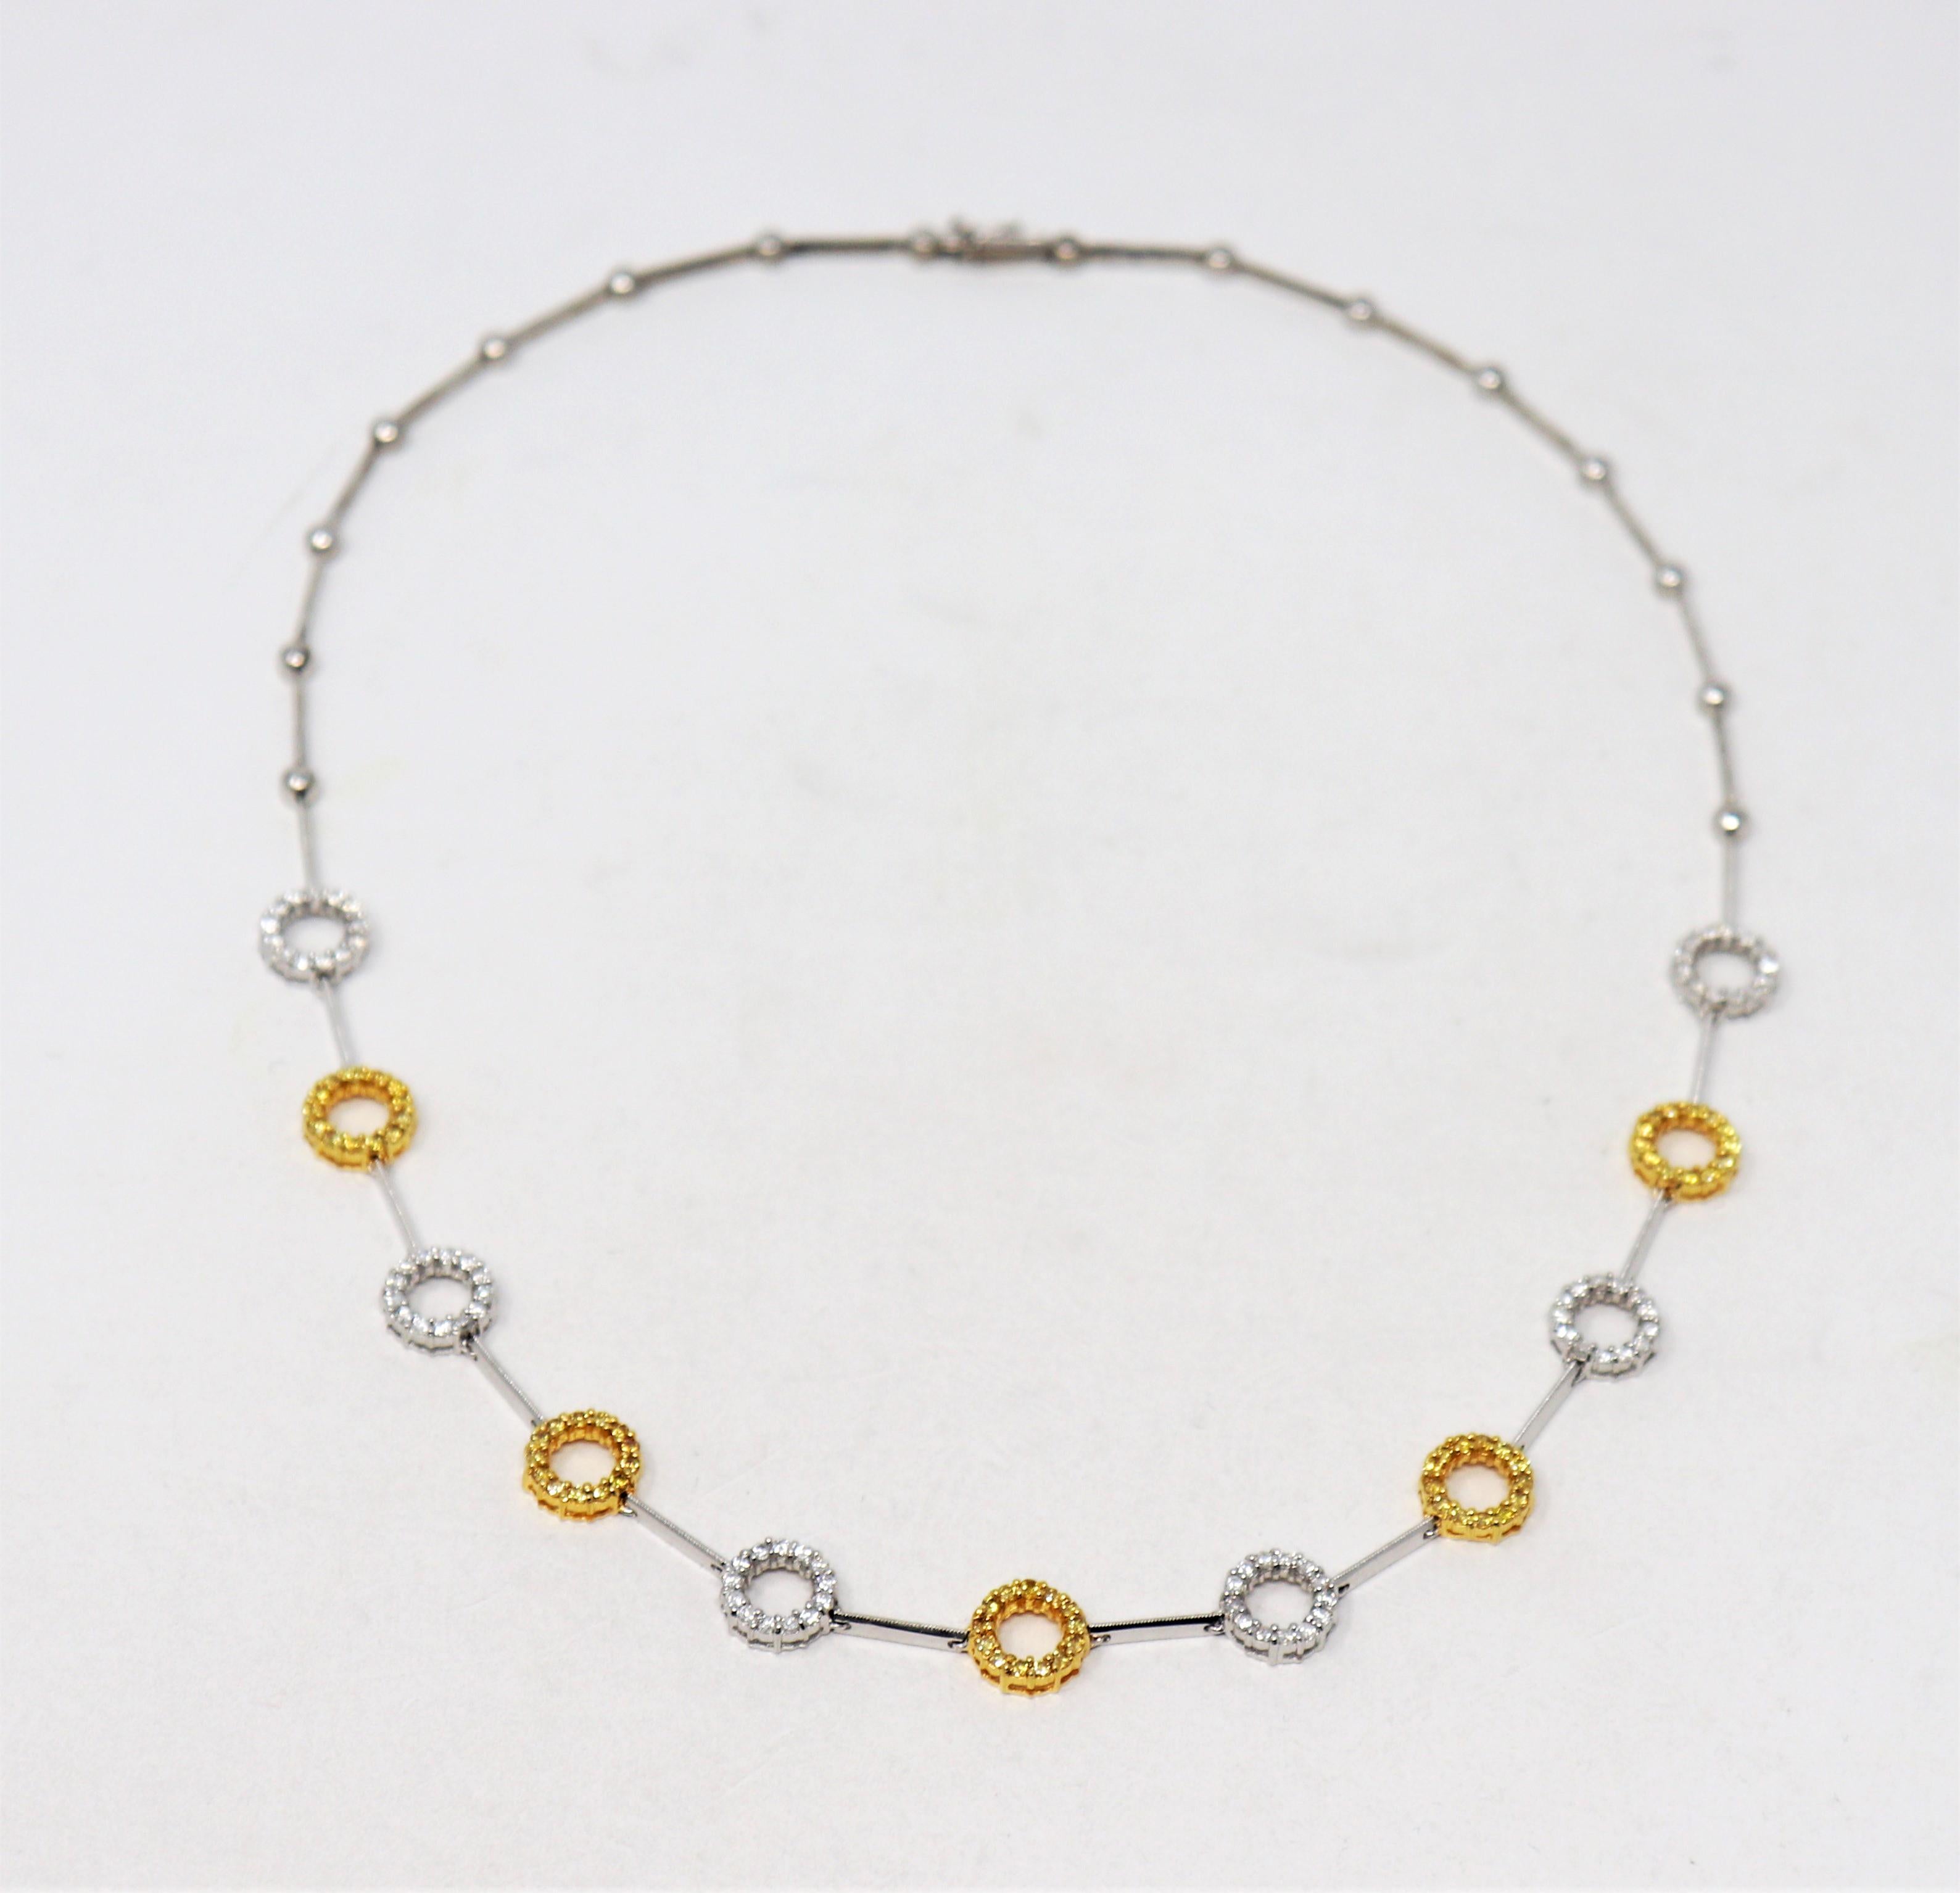 This is a lovely two-tone station necklace with glittering pave diamonds. The delicate open circles alternate between natural white and fancy yellow stones, joined together by sleek, polished bar links. A truly gorgeous piece!

This versatile